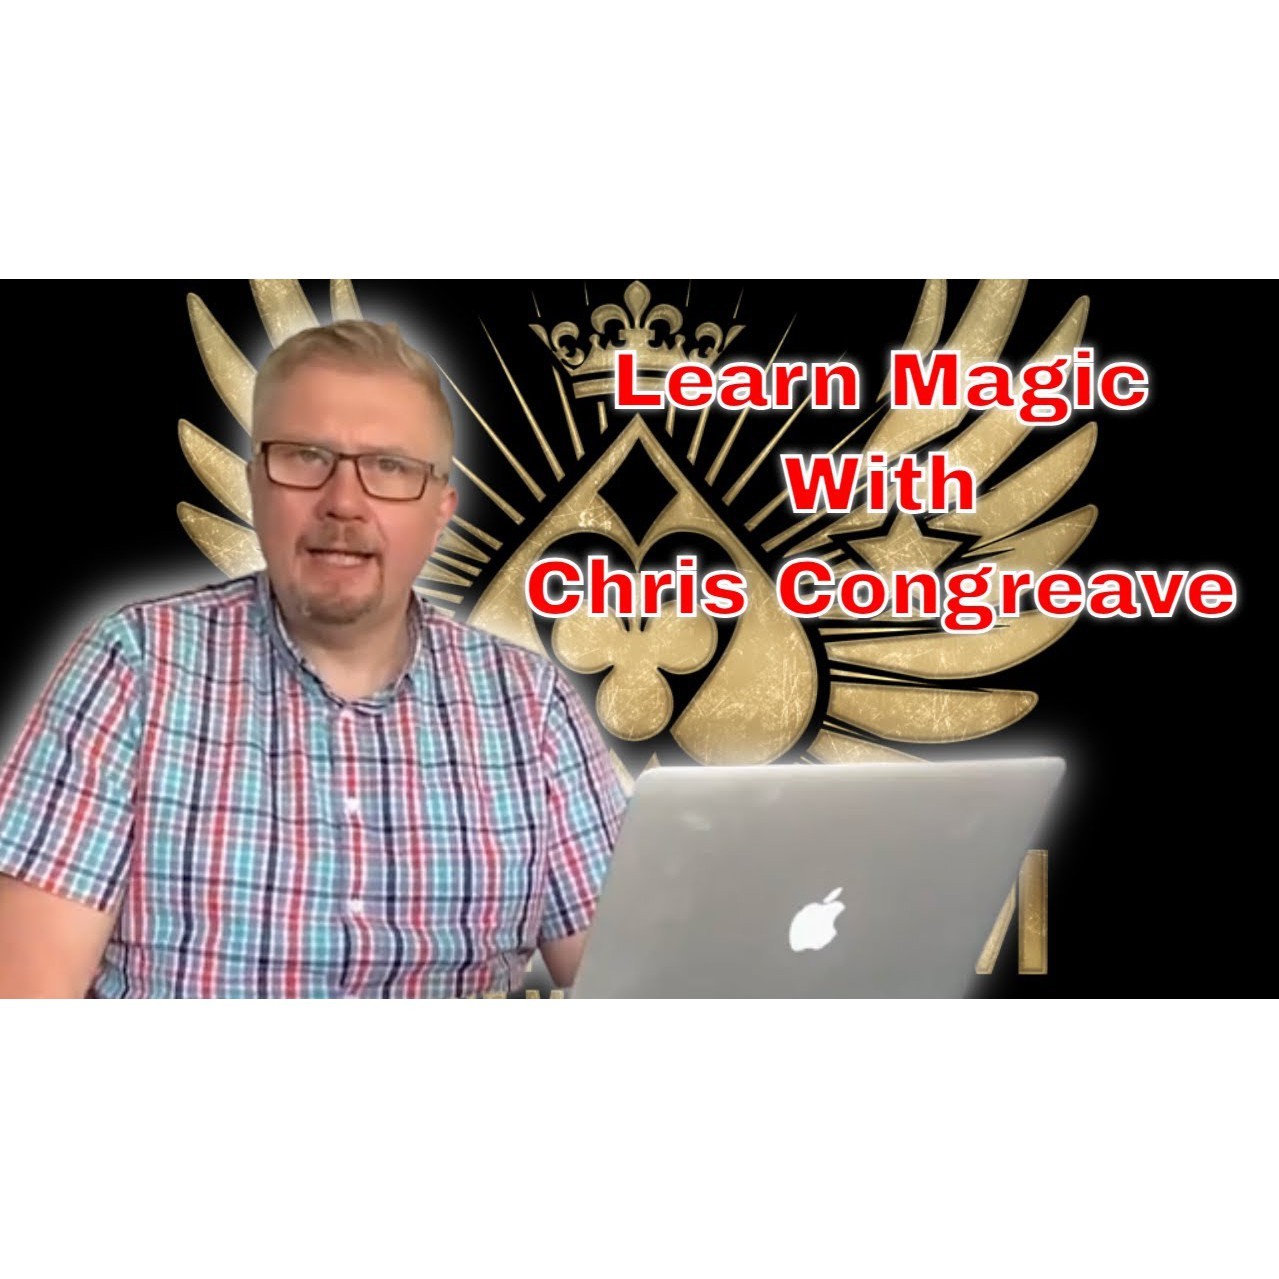 Alakazam Online Magic Academy - One More Thing The Chris Congreave Academy